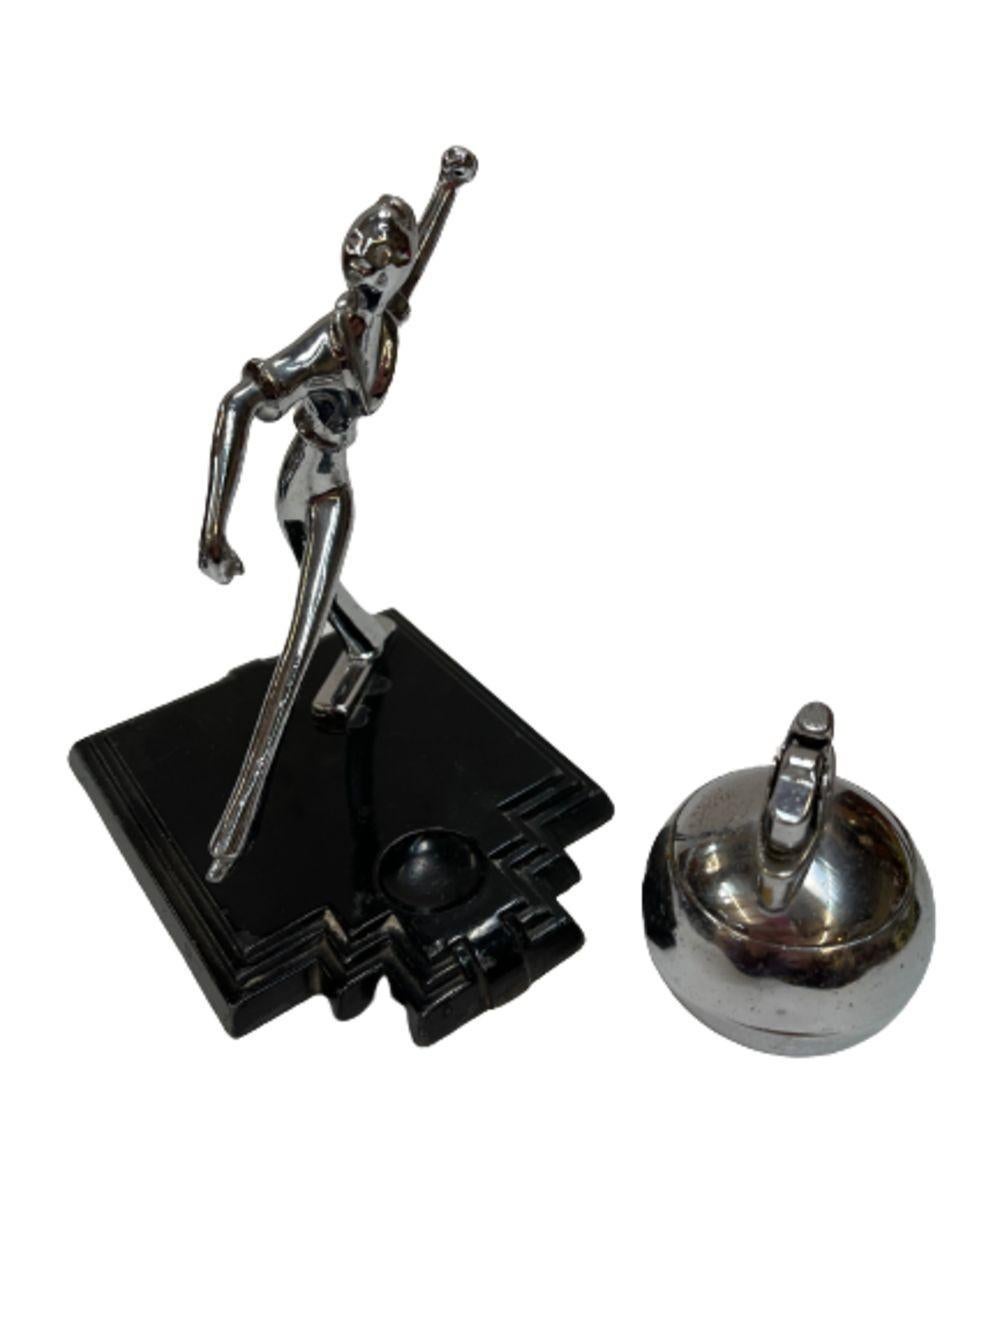 Art Deco Ball Player Table Table Lighter with Base by Ronson For Sale 1